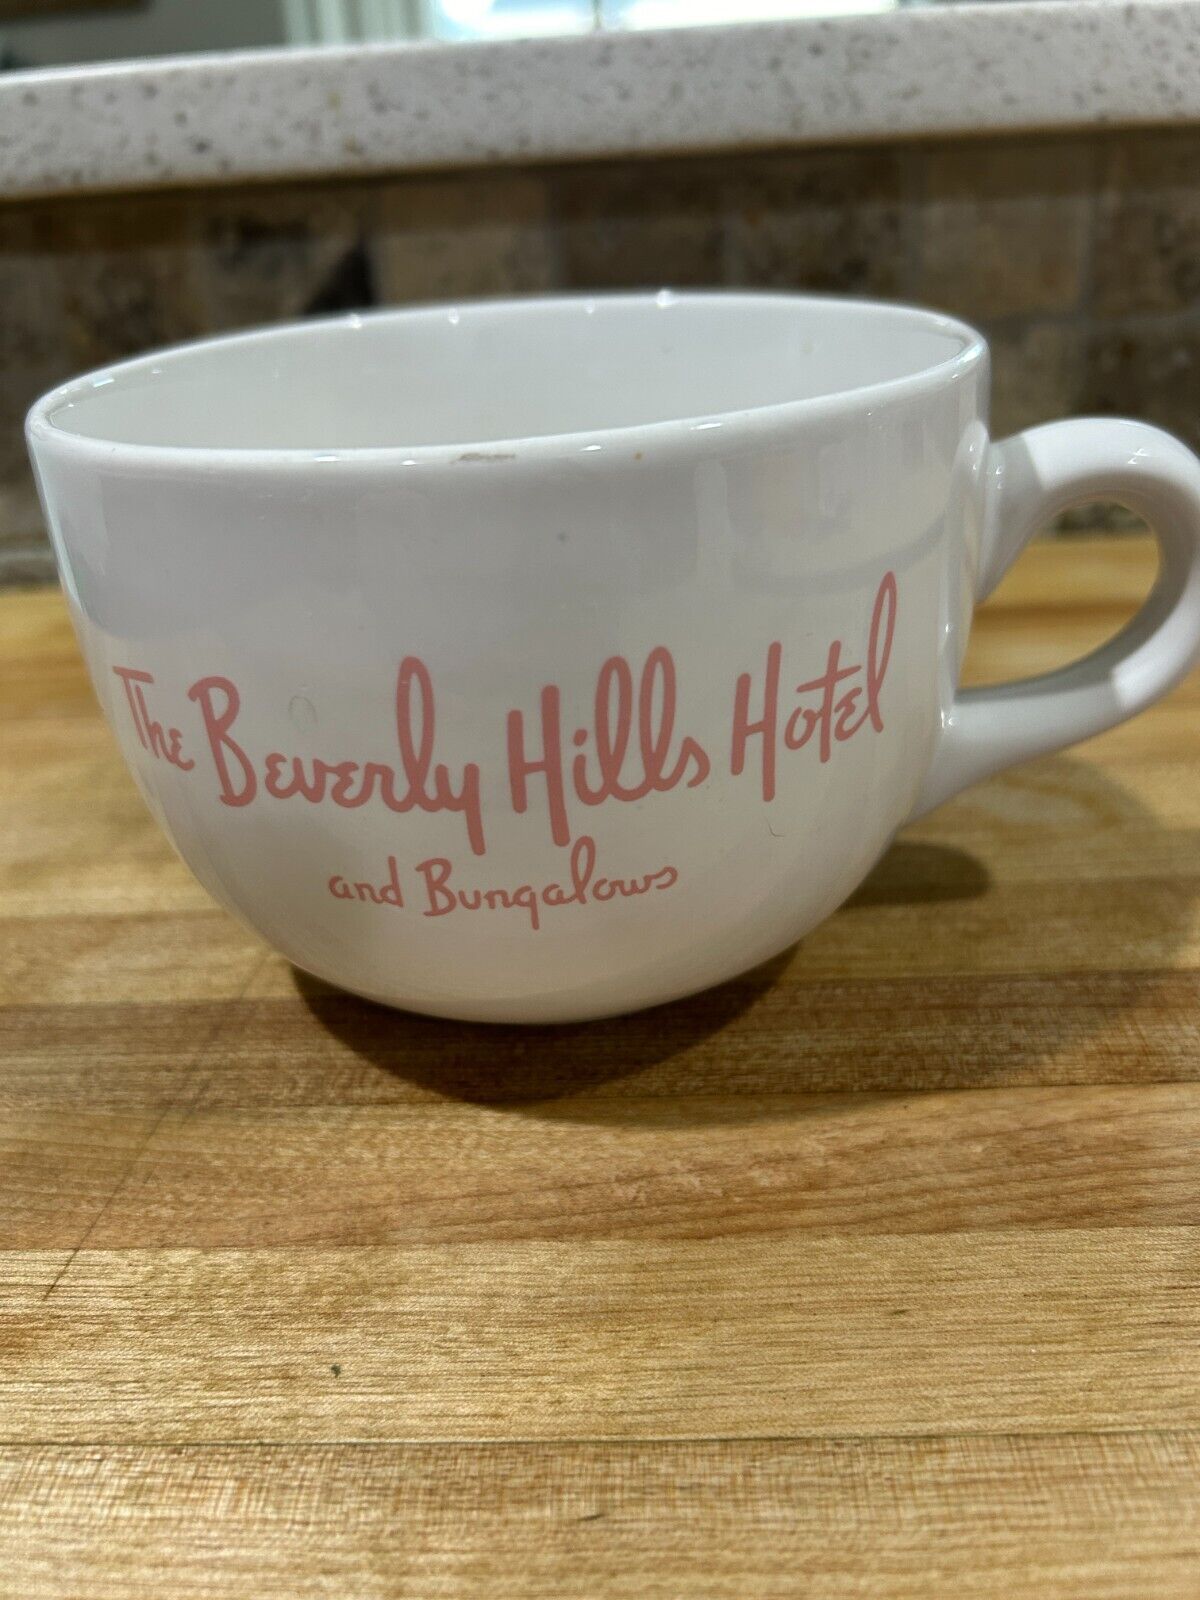 VINTAGE THE BEVERLY HILLS HOTEL AND BUNGALOWS CUP White / Classic Pink Lettering